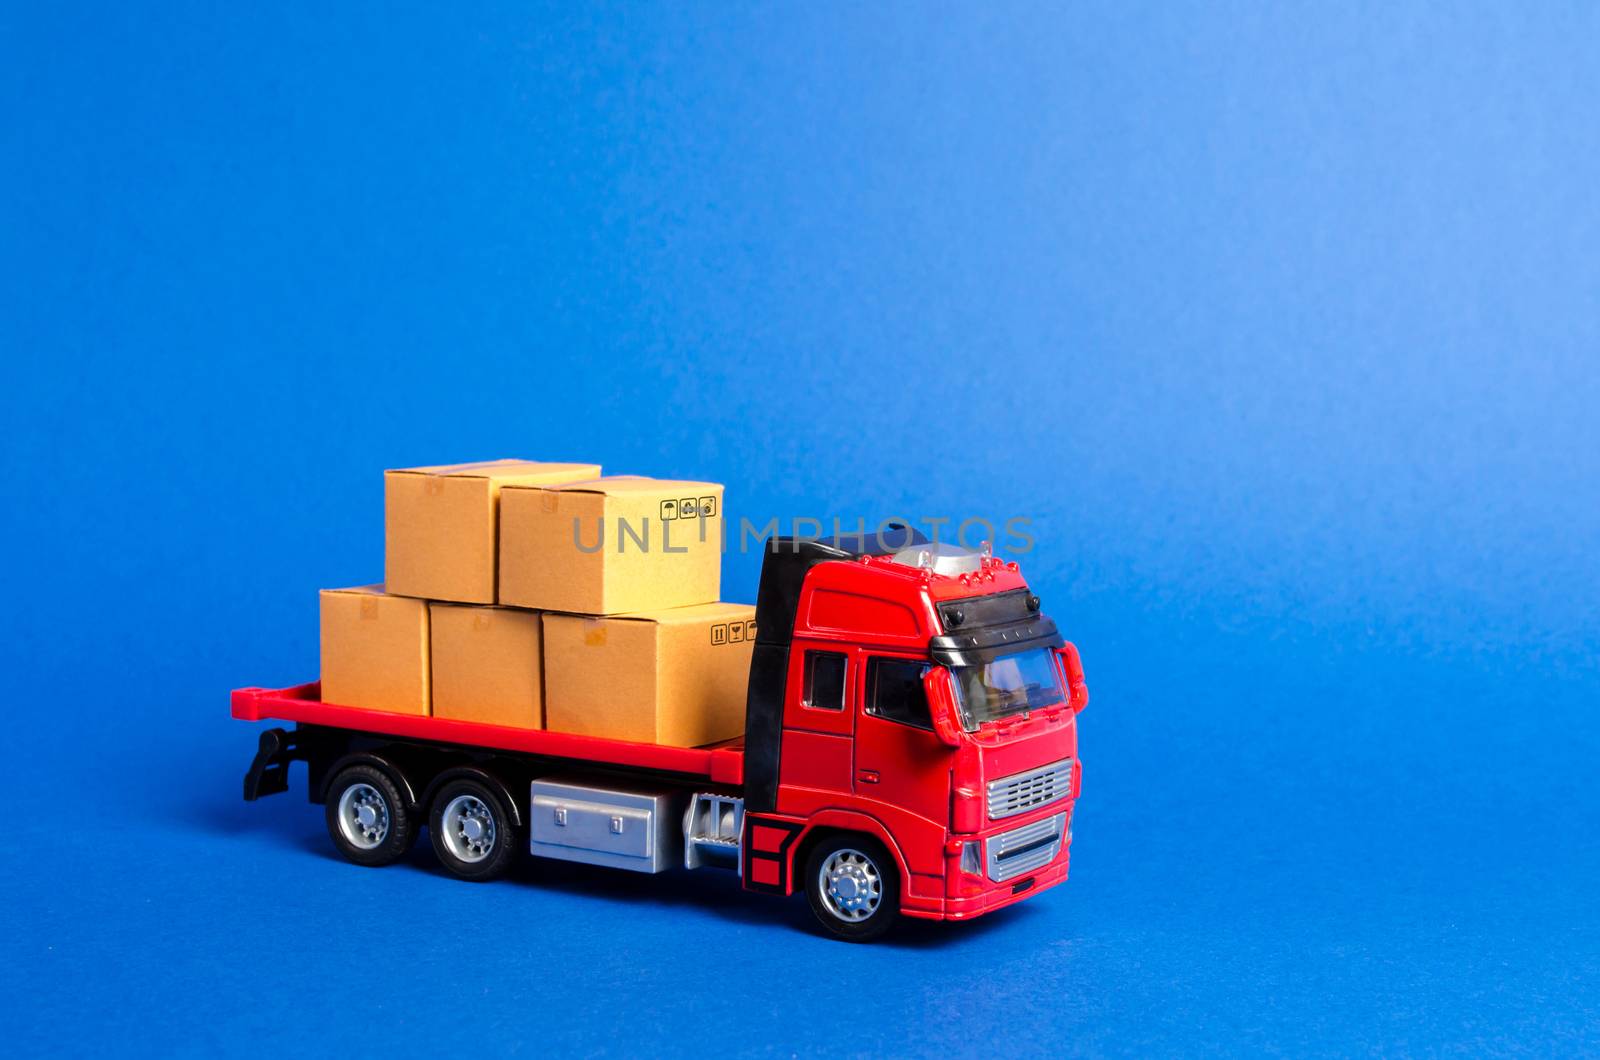 A red truck loaded with boxes. Services transportation of goods and products, logistics and infrastructure. Transportation company. Warehousing and supply. Optimization of delivery logistics. by iLixe48